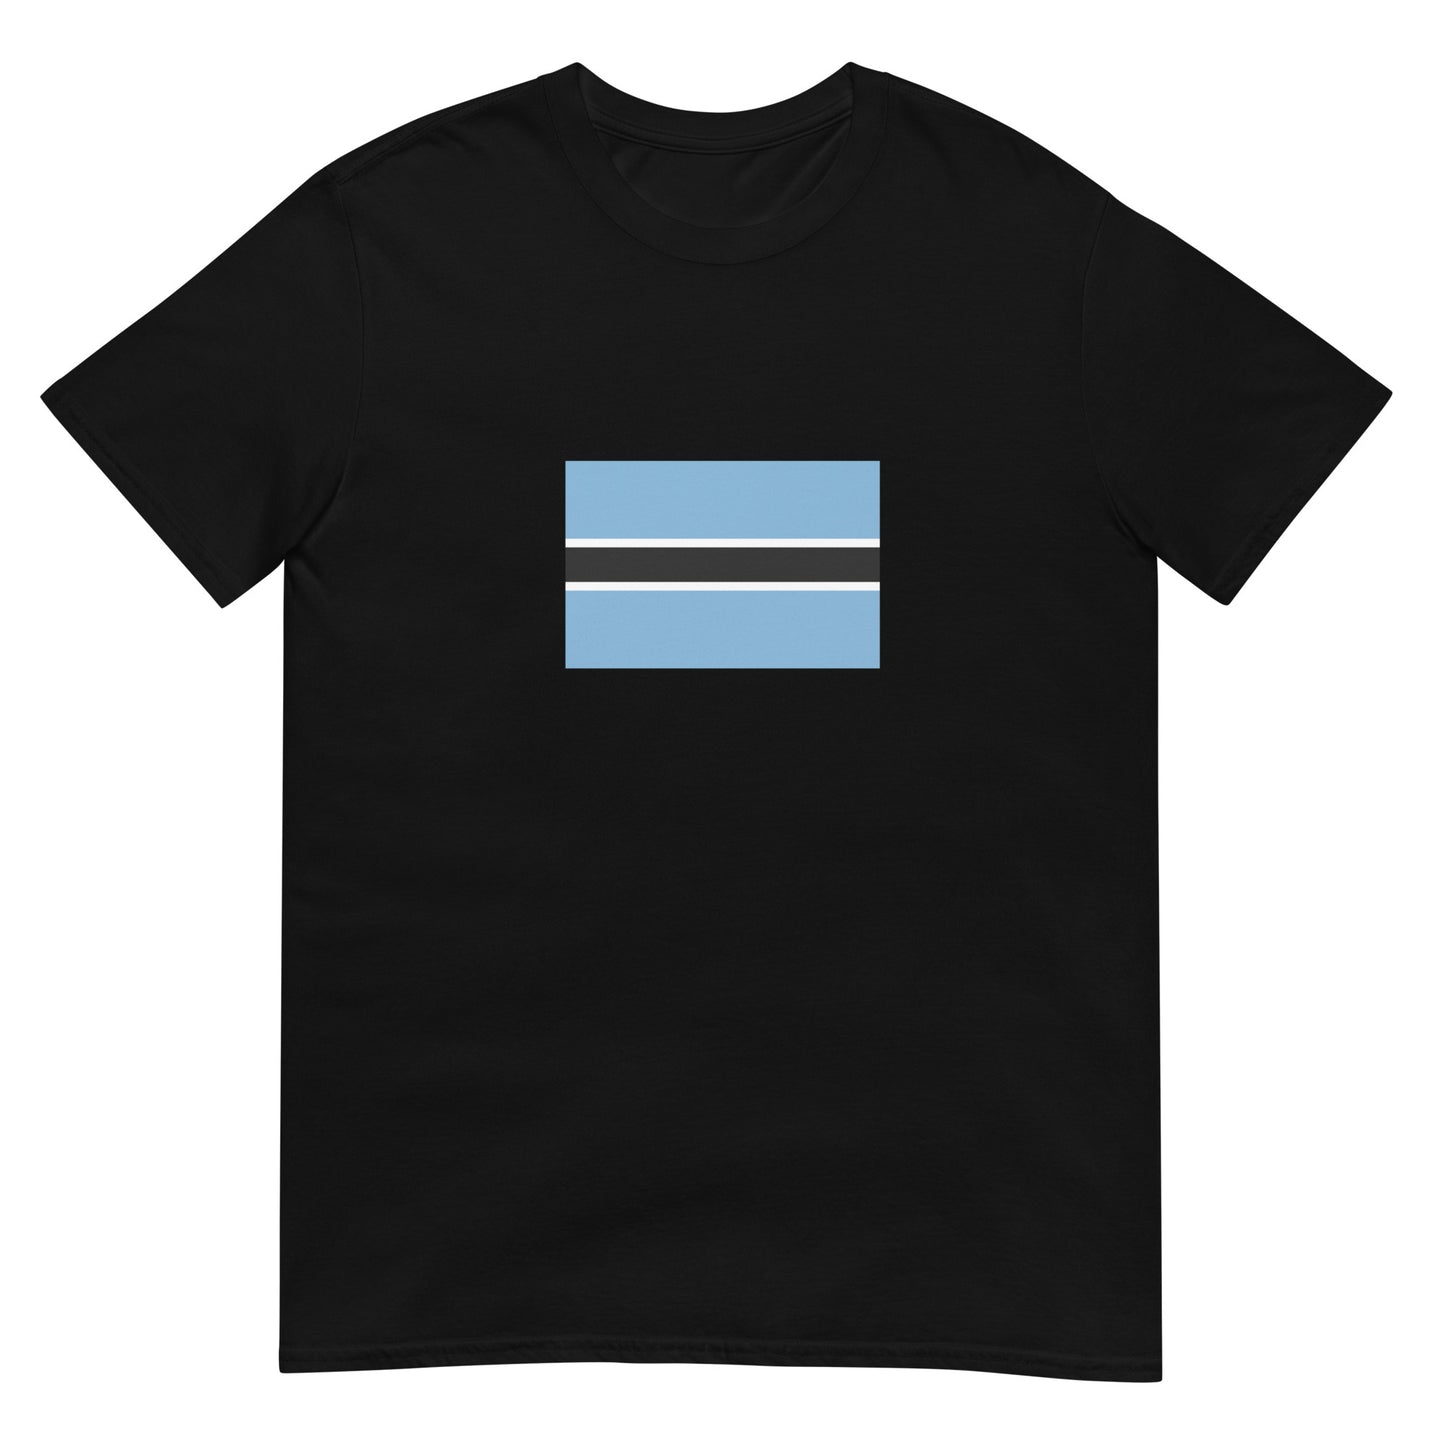 South Africa - Batswana people | Ethnic South Africa Flag Interactive T-shirt